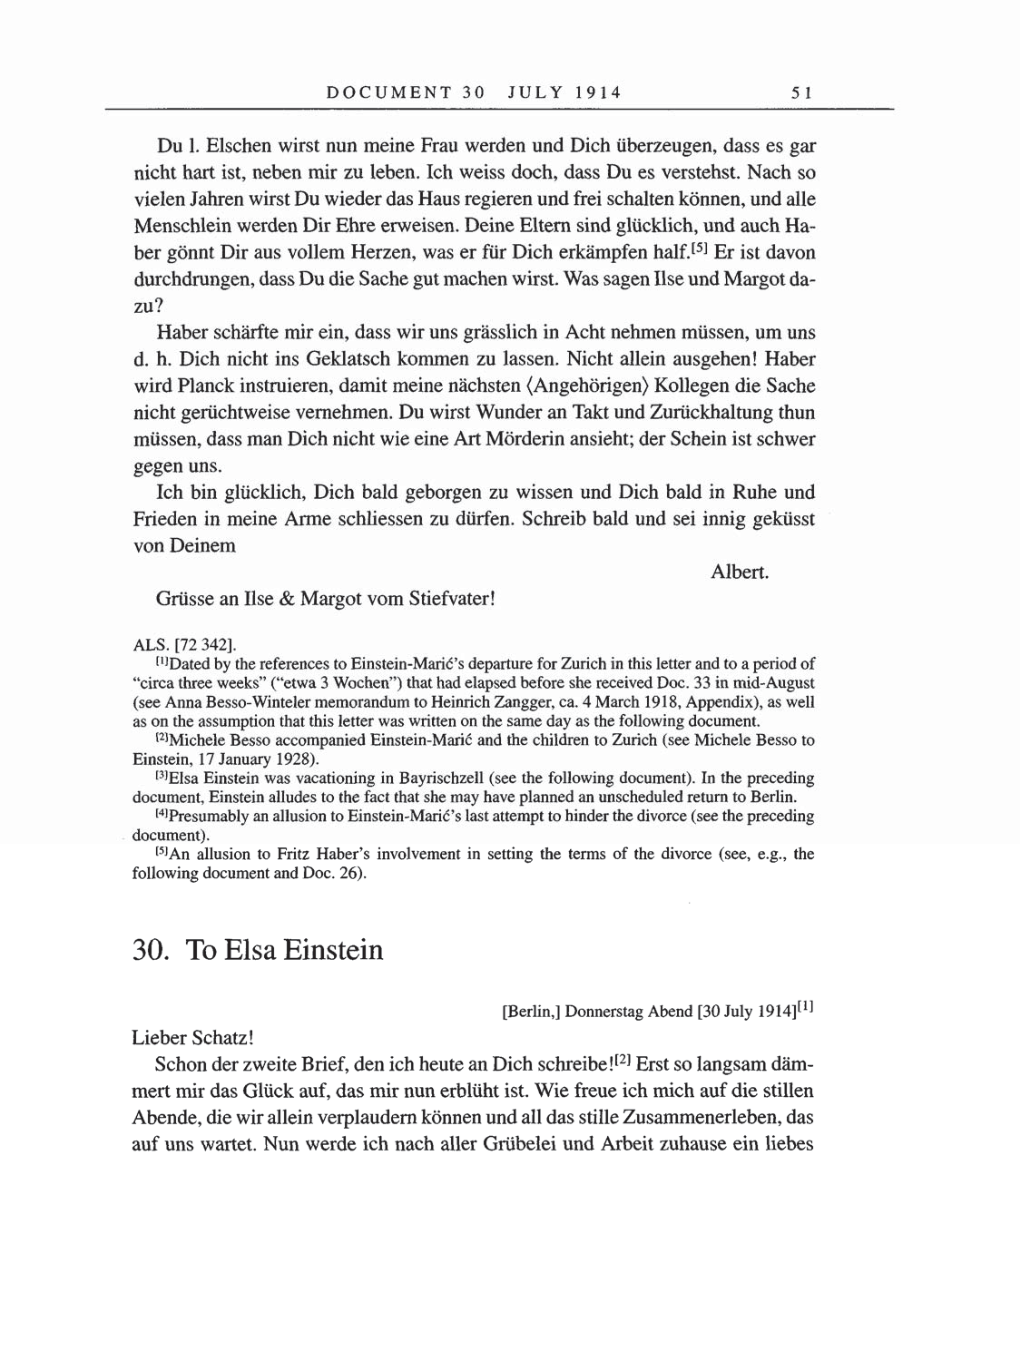 Volume 8, Part A: The Berlin Years: Correspondence 1914-1917 page 51